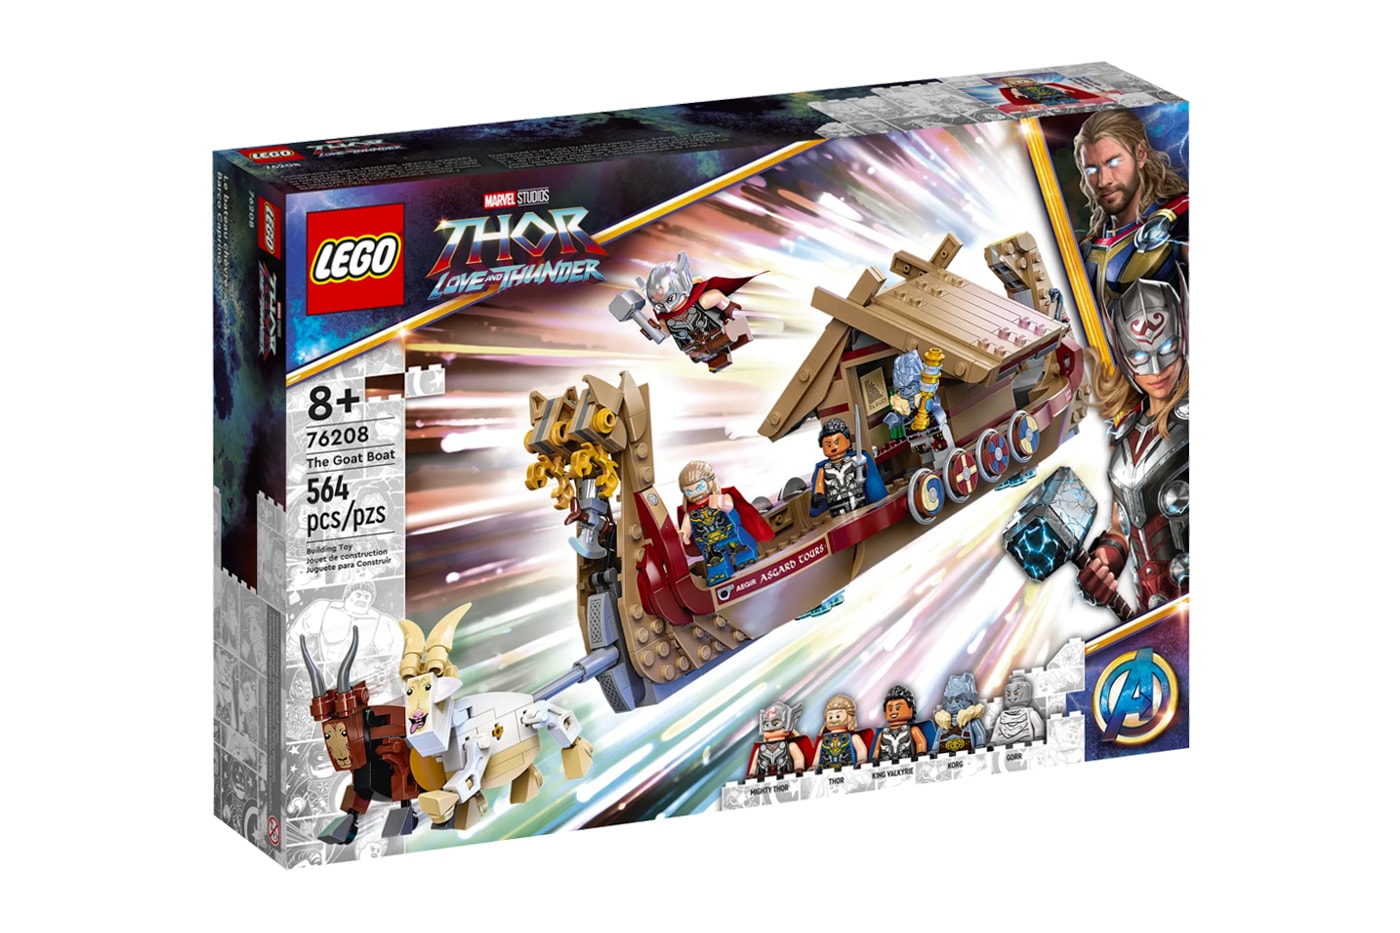 LEGO《Thor: Love and Thunder》「山羊船 The Goat Boat」積木套組正式發佈